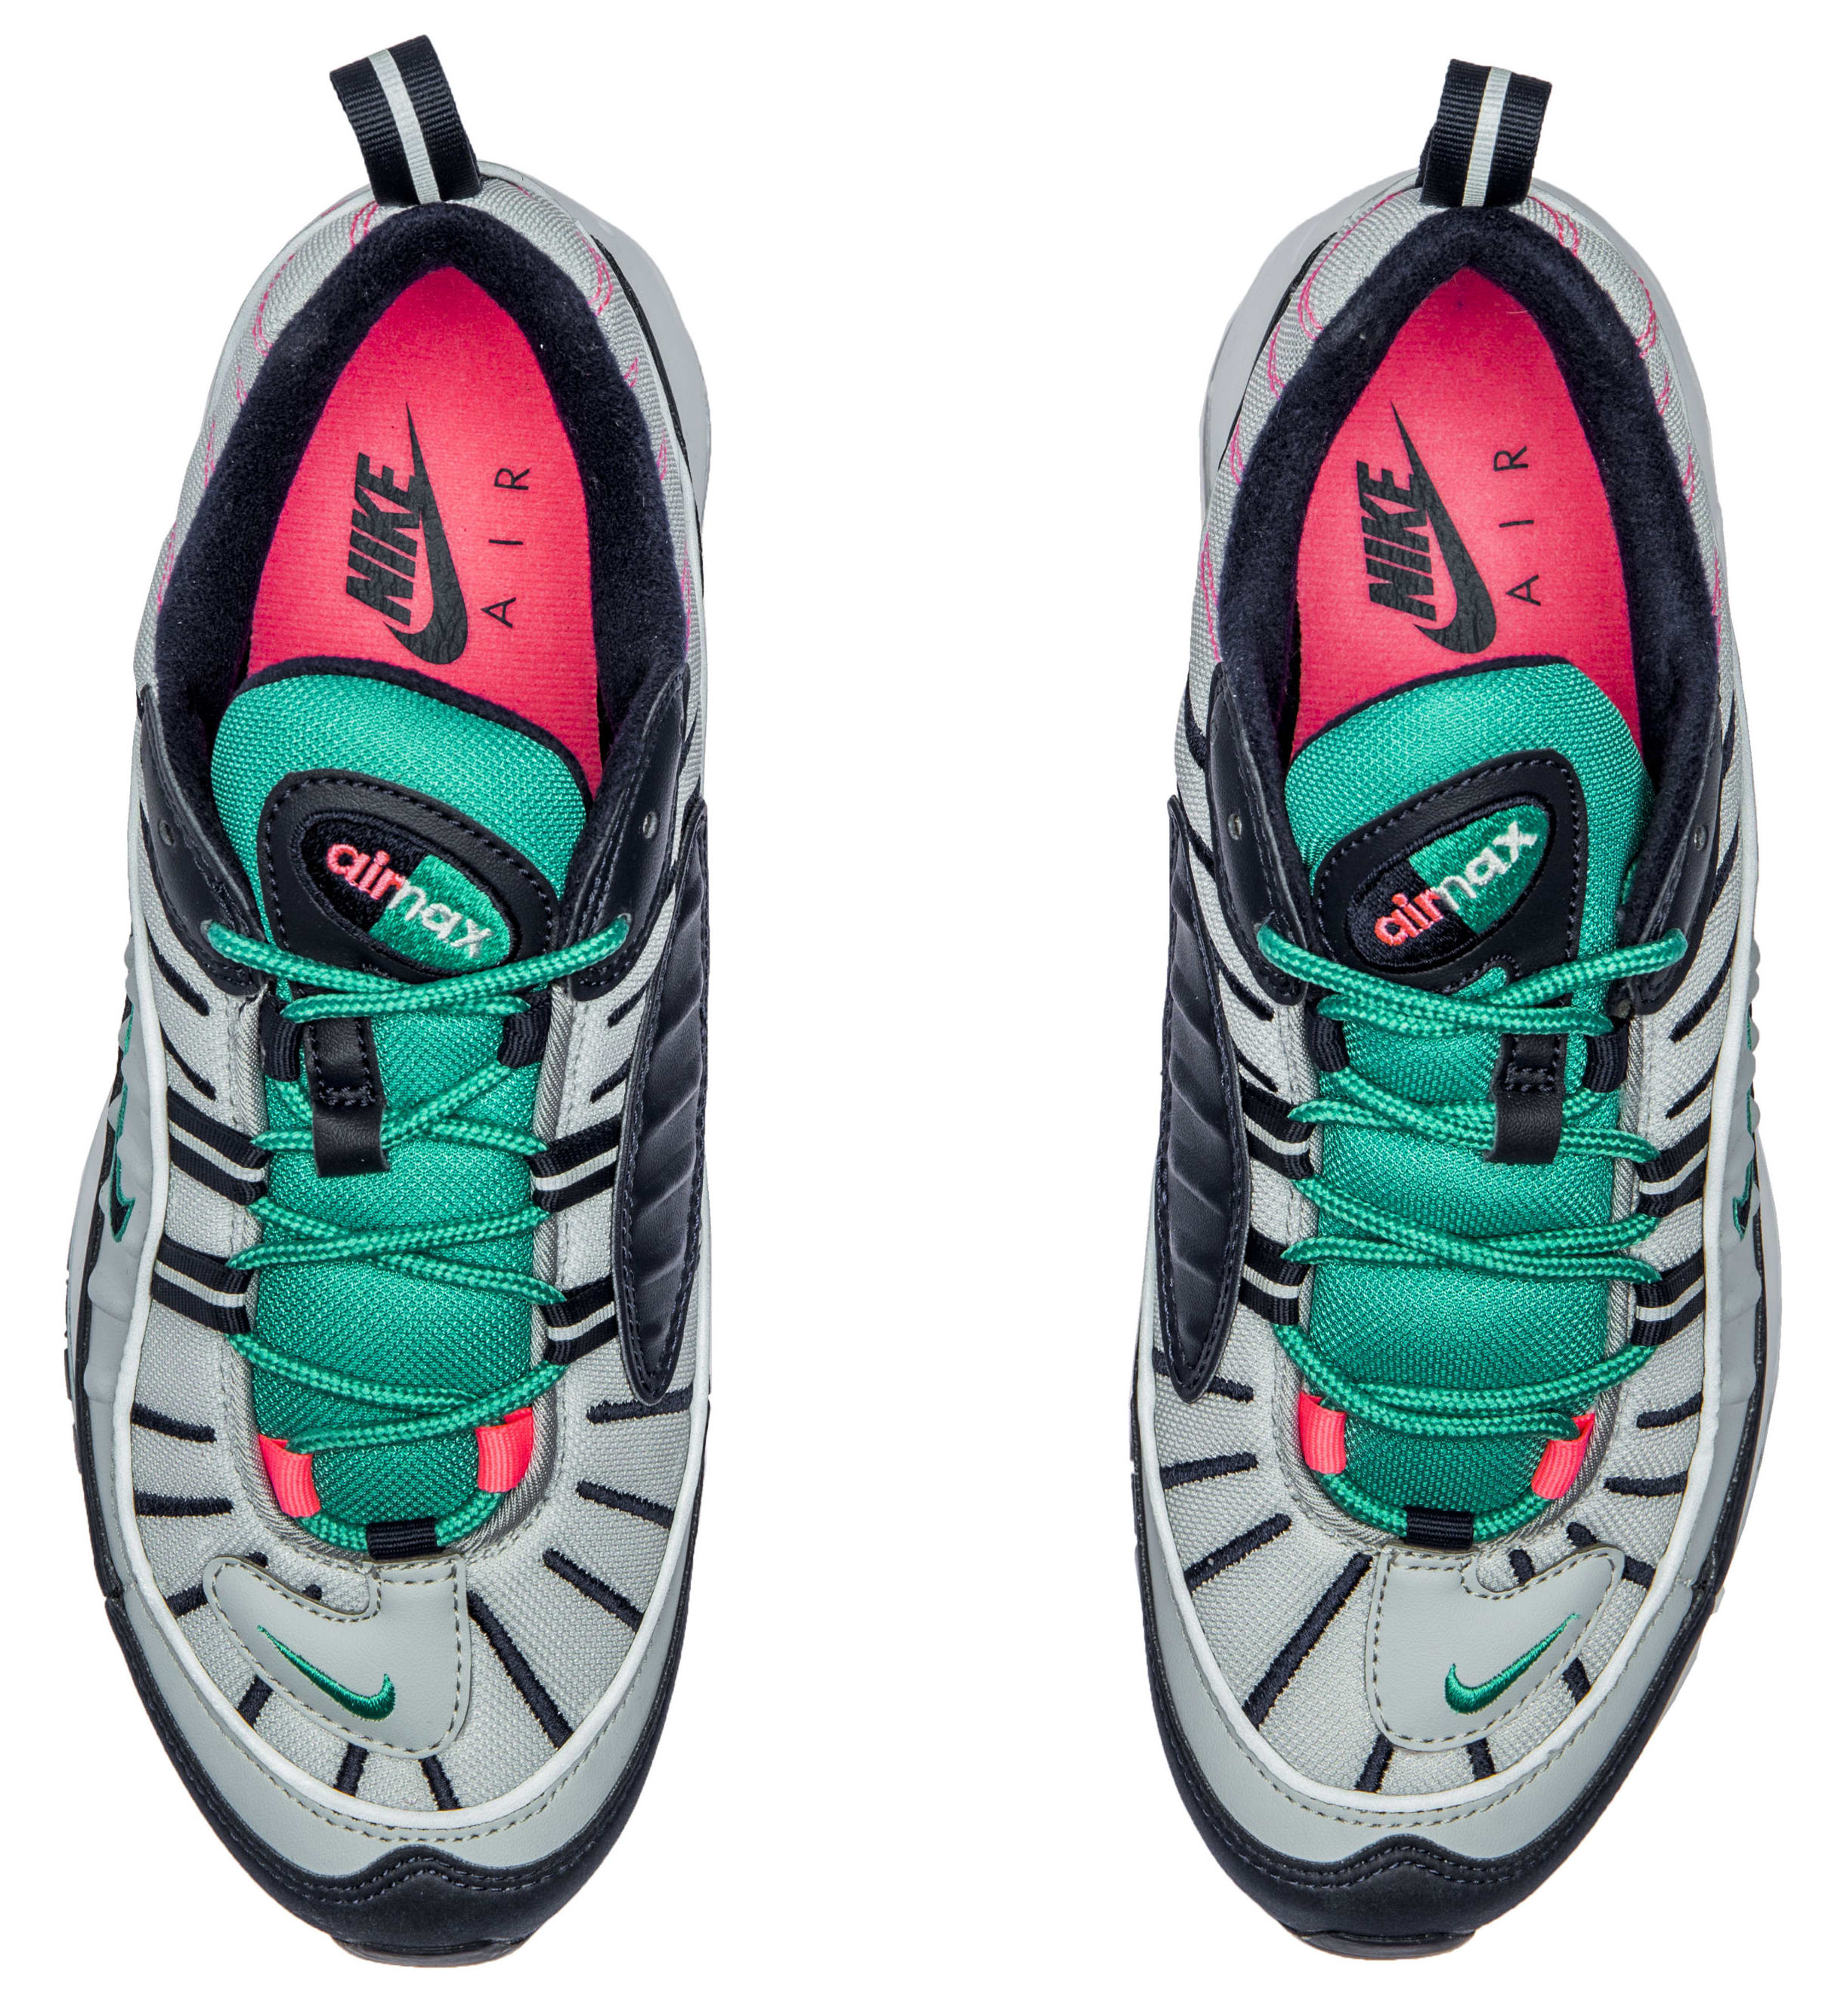 Best Look Yet at 'South Beach' Max 98s Complex